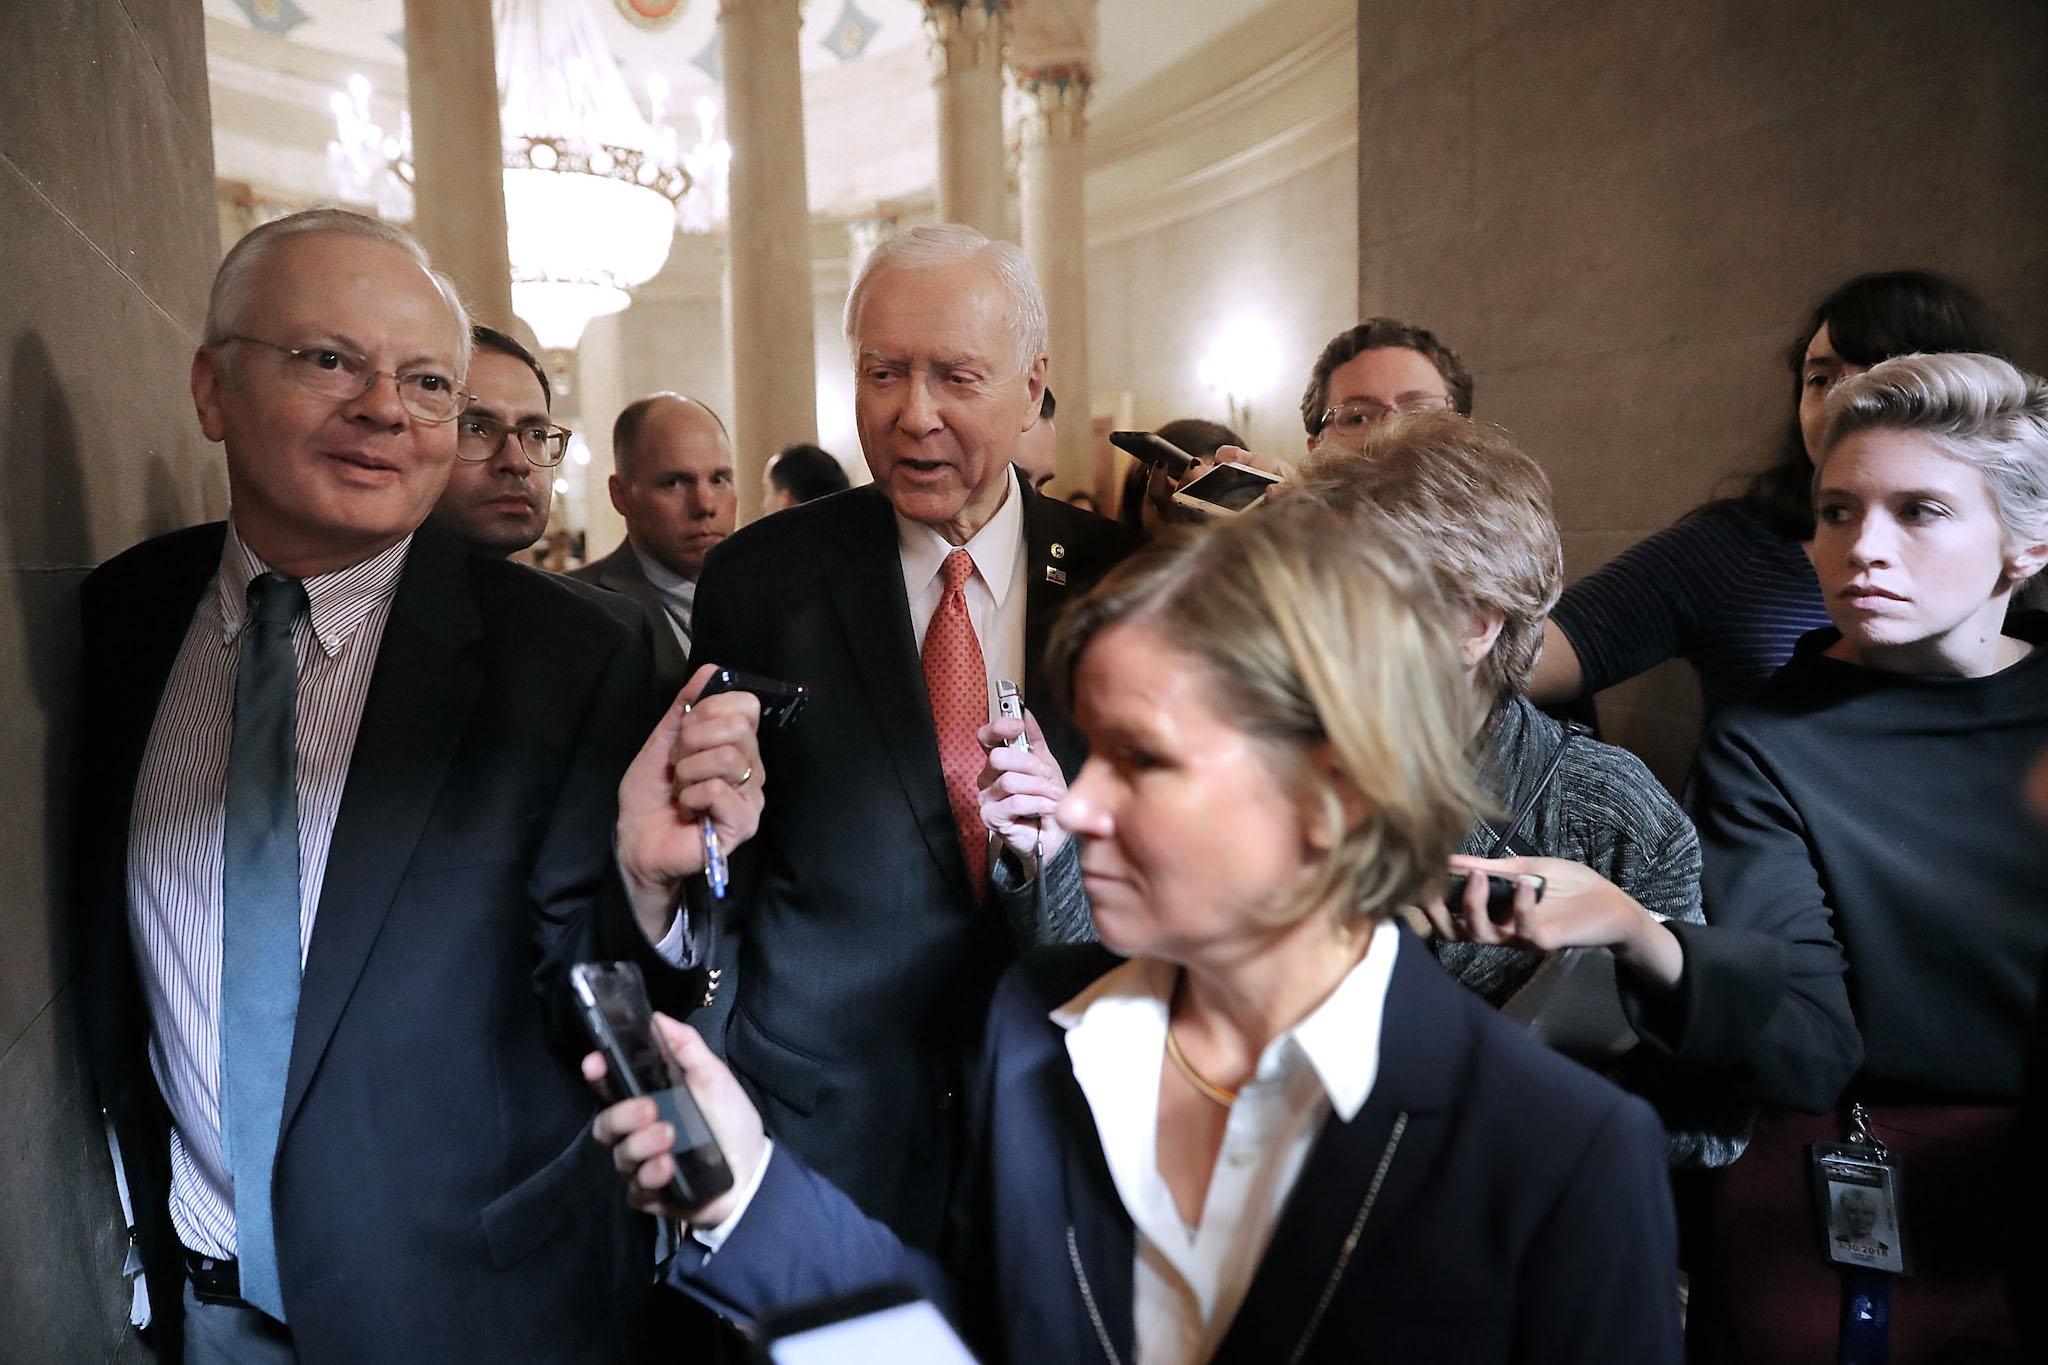 Senate Finance Committee Chairman Orrin Hatch talks with journalists before heading into a tax meeting (Photo by Chip Somodevilla/Getty Images)